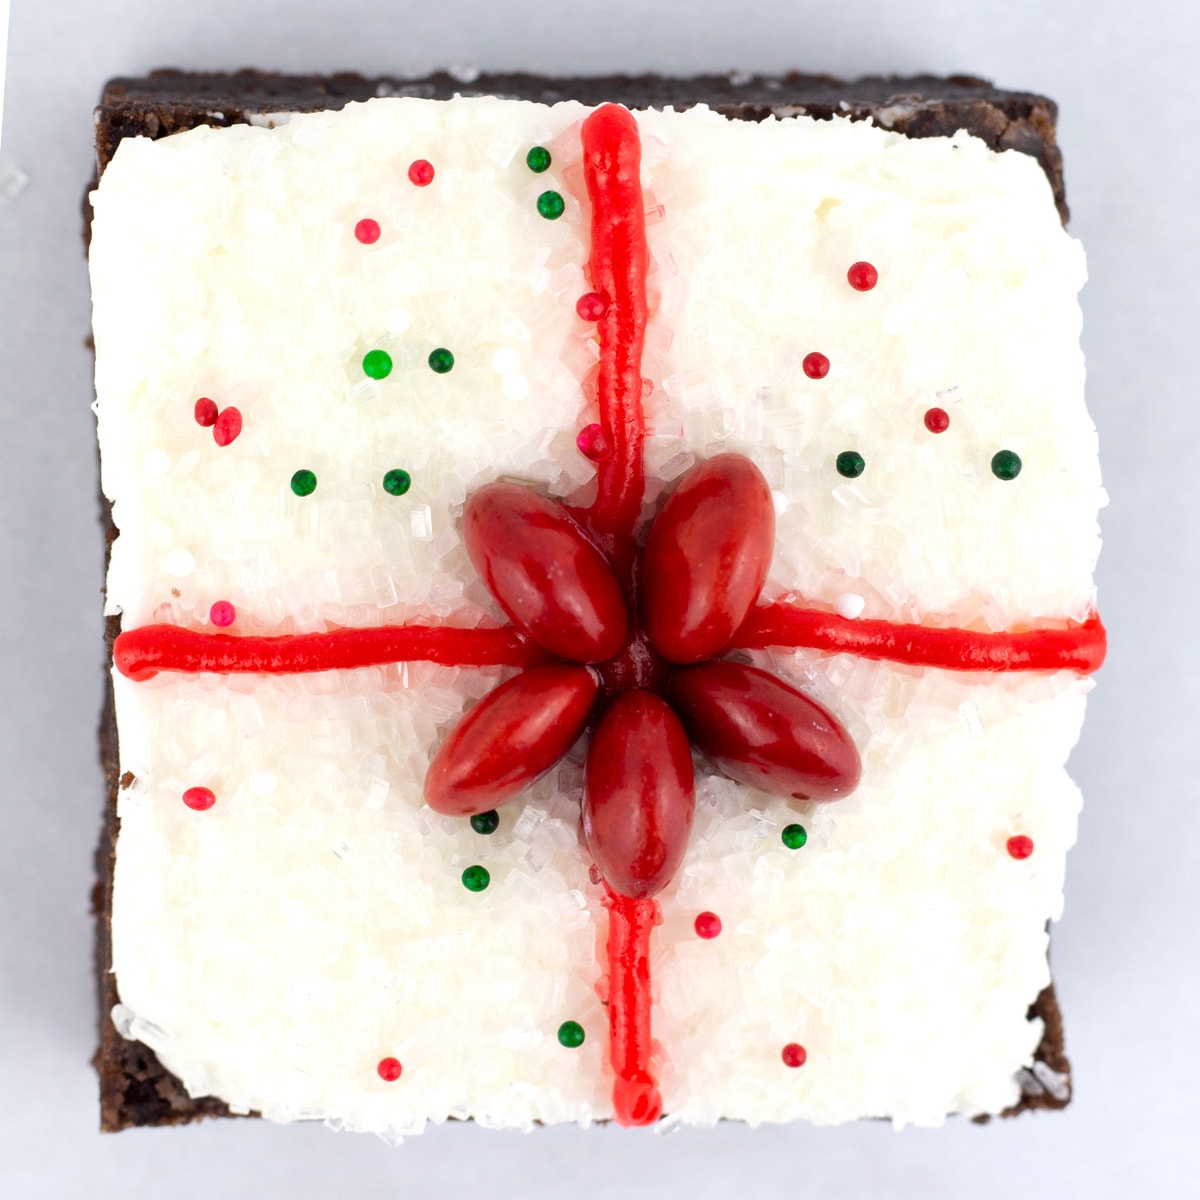 A square brownie decorated as a Christmas present with a red bow and circle sprinkles.